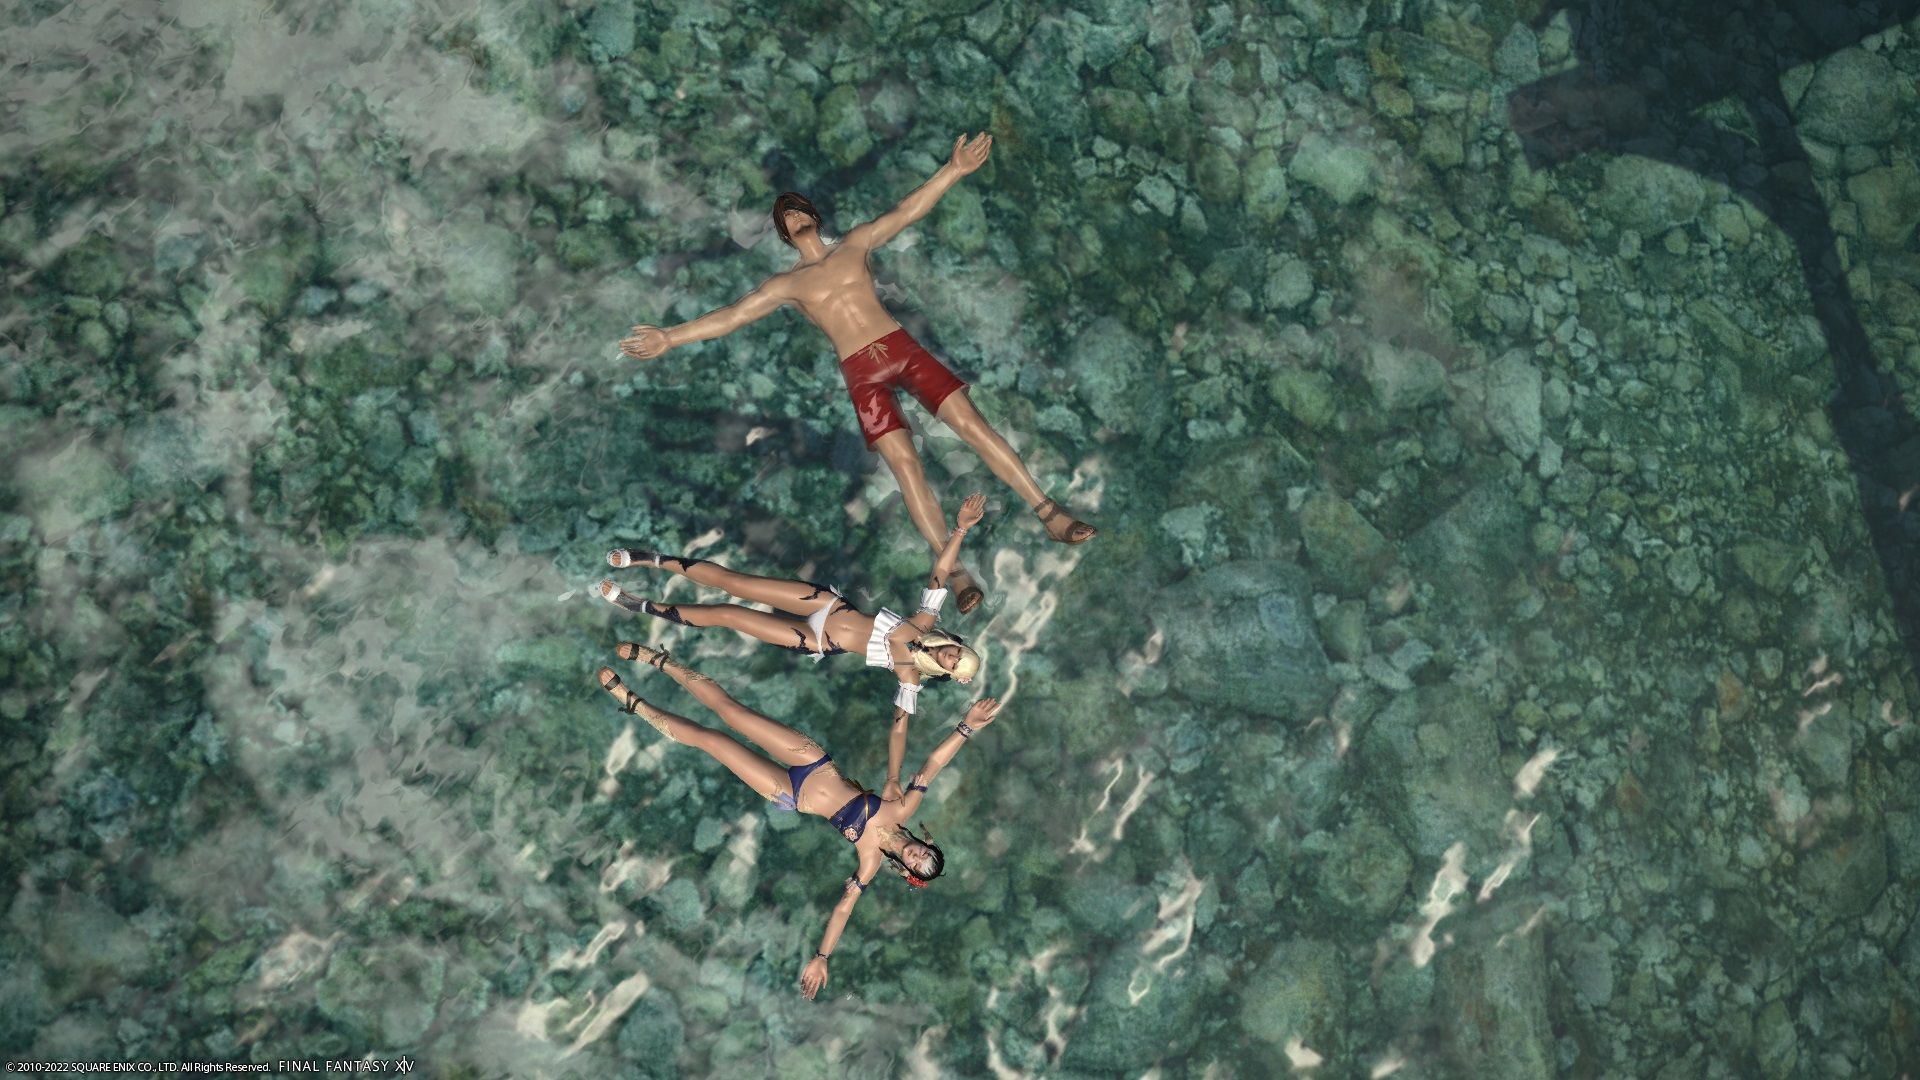 Final Fantasy 14 players floating in the water